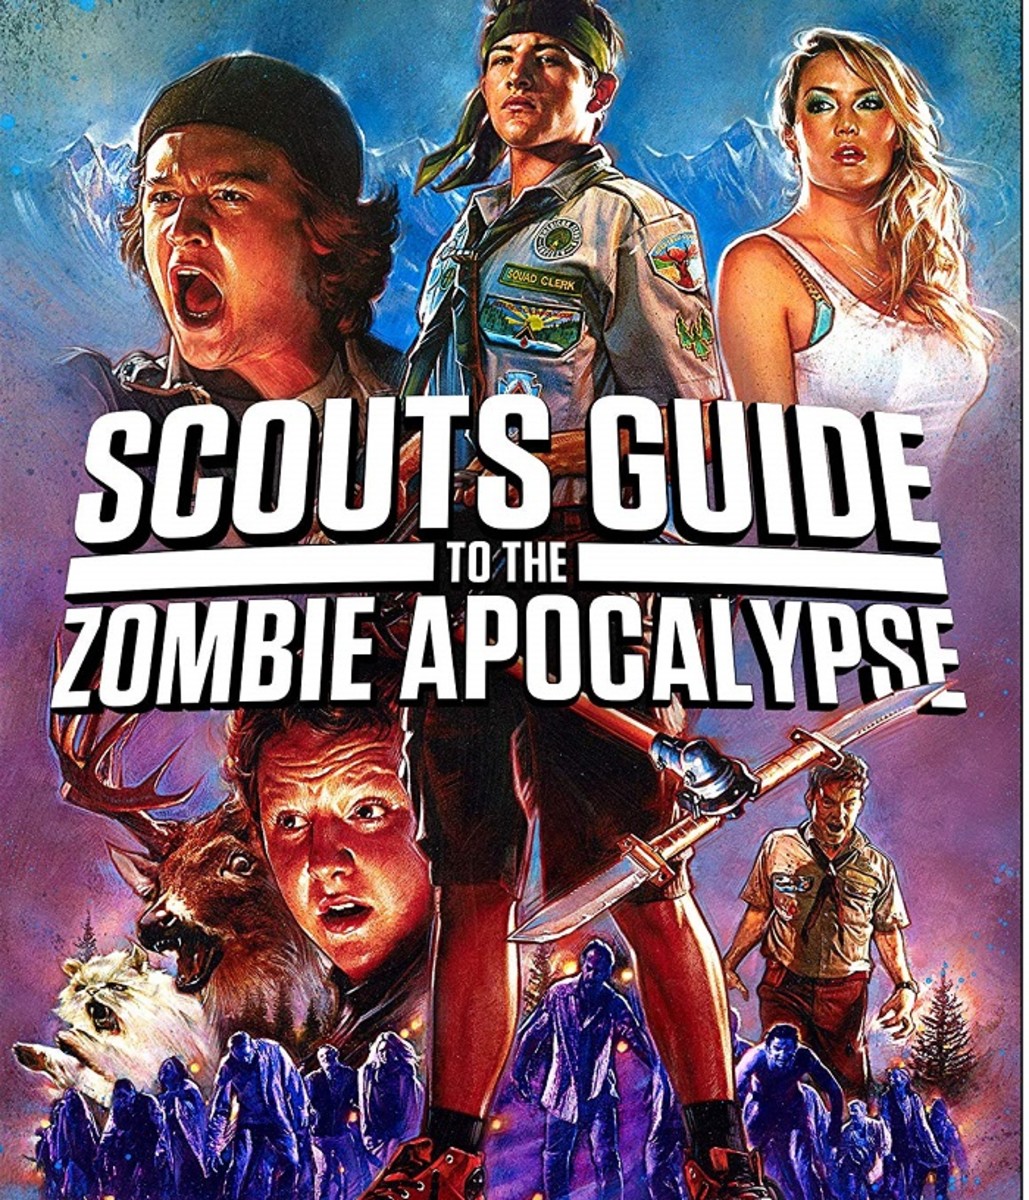 Scouts Guide to the Zombie Apocalypse.